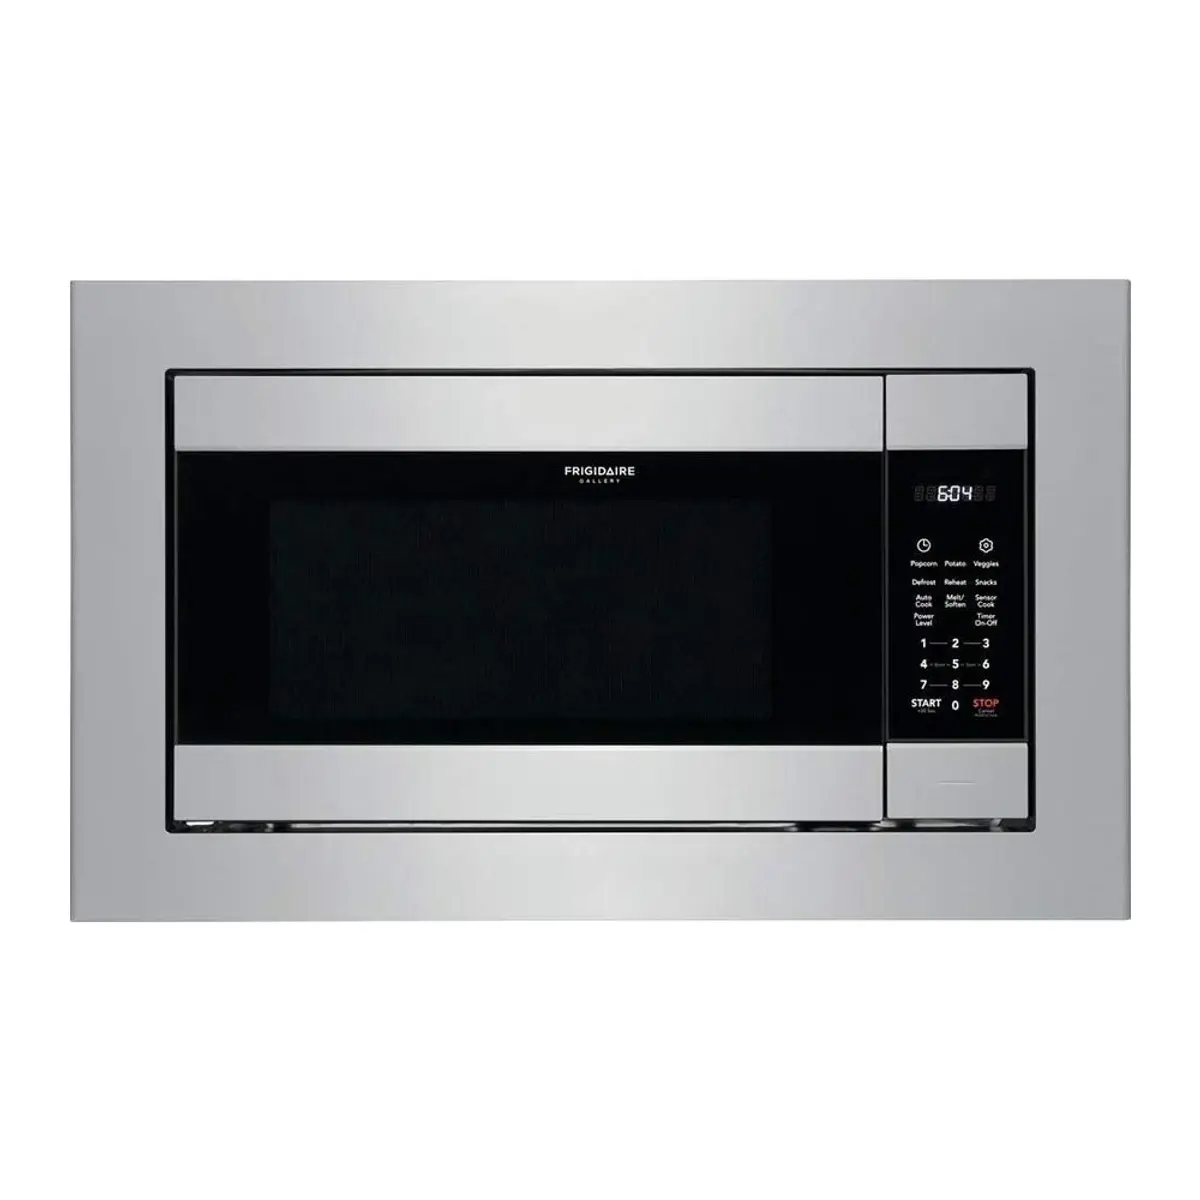 FRIGIDAIRE FGMO226NUF Built-in Microwave Oven